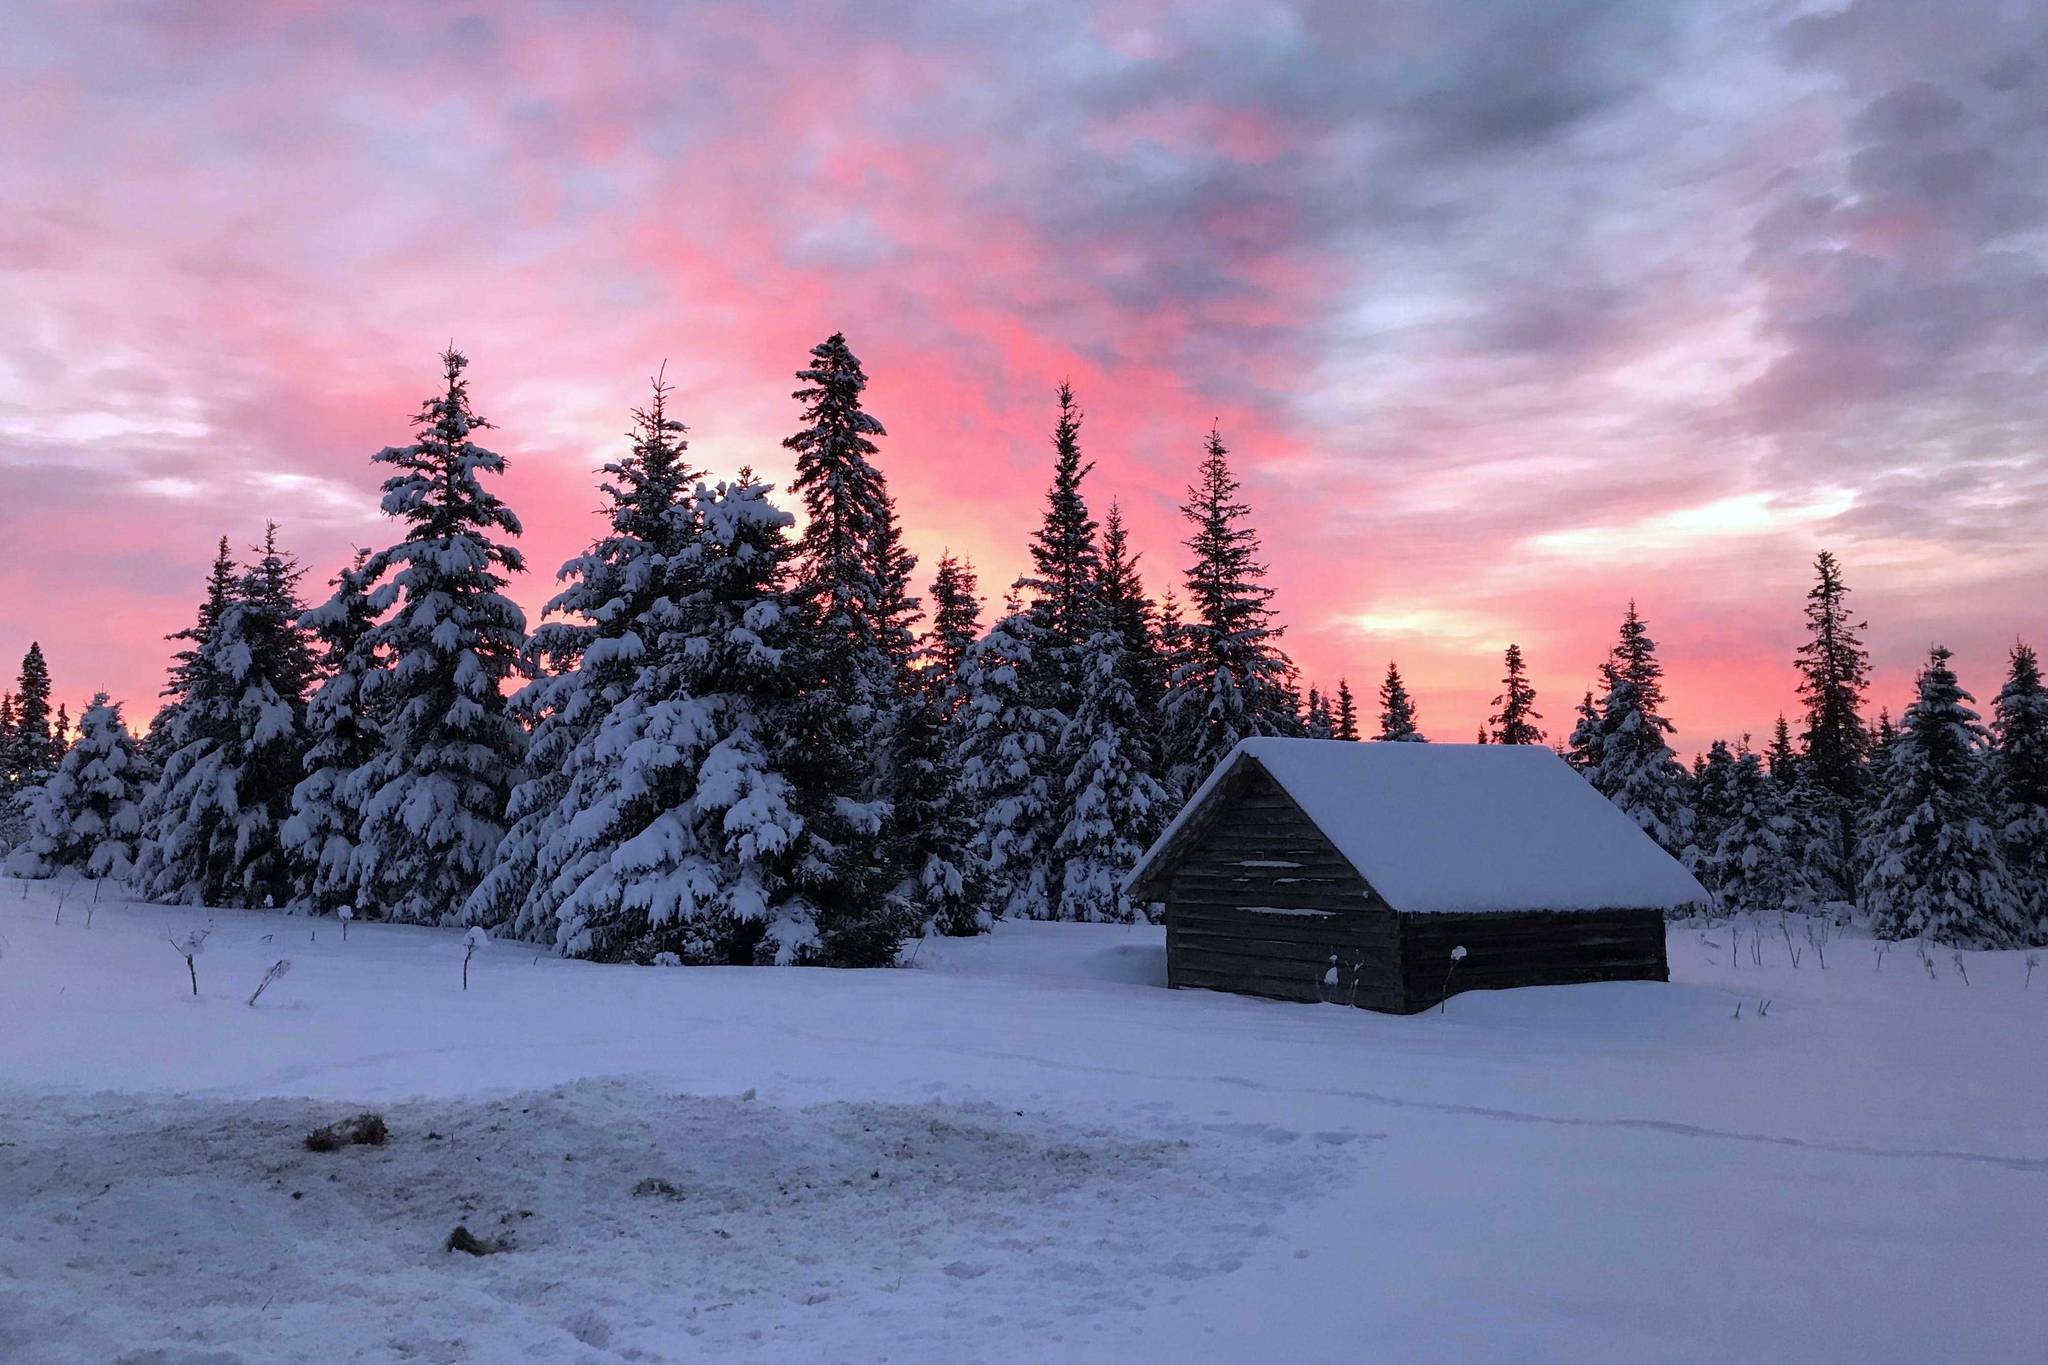 The view of a Homer sunrise as seen from the cabin where the author spent a recent winter weekend. (Photo by Kat Sorensen/Peninsula Clarion)